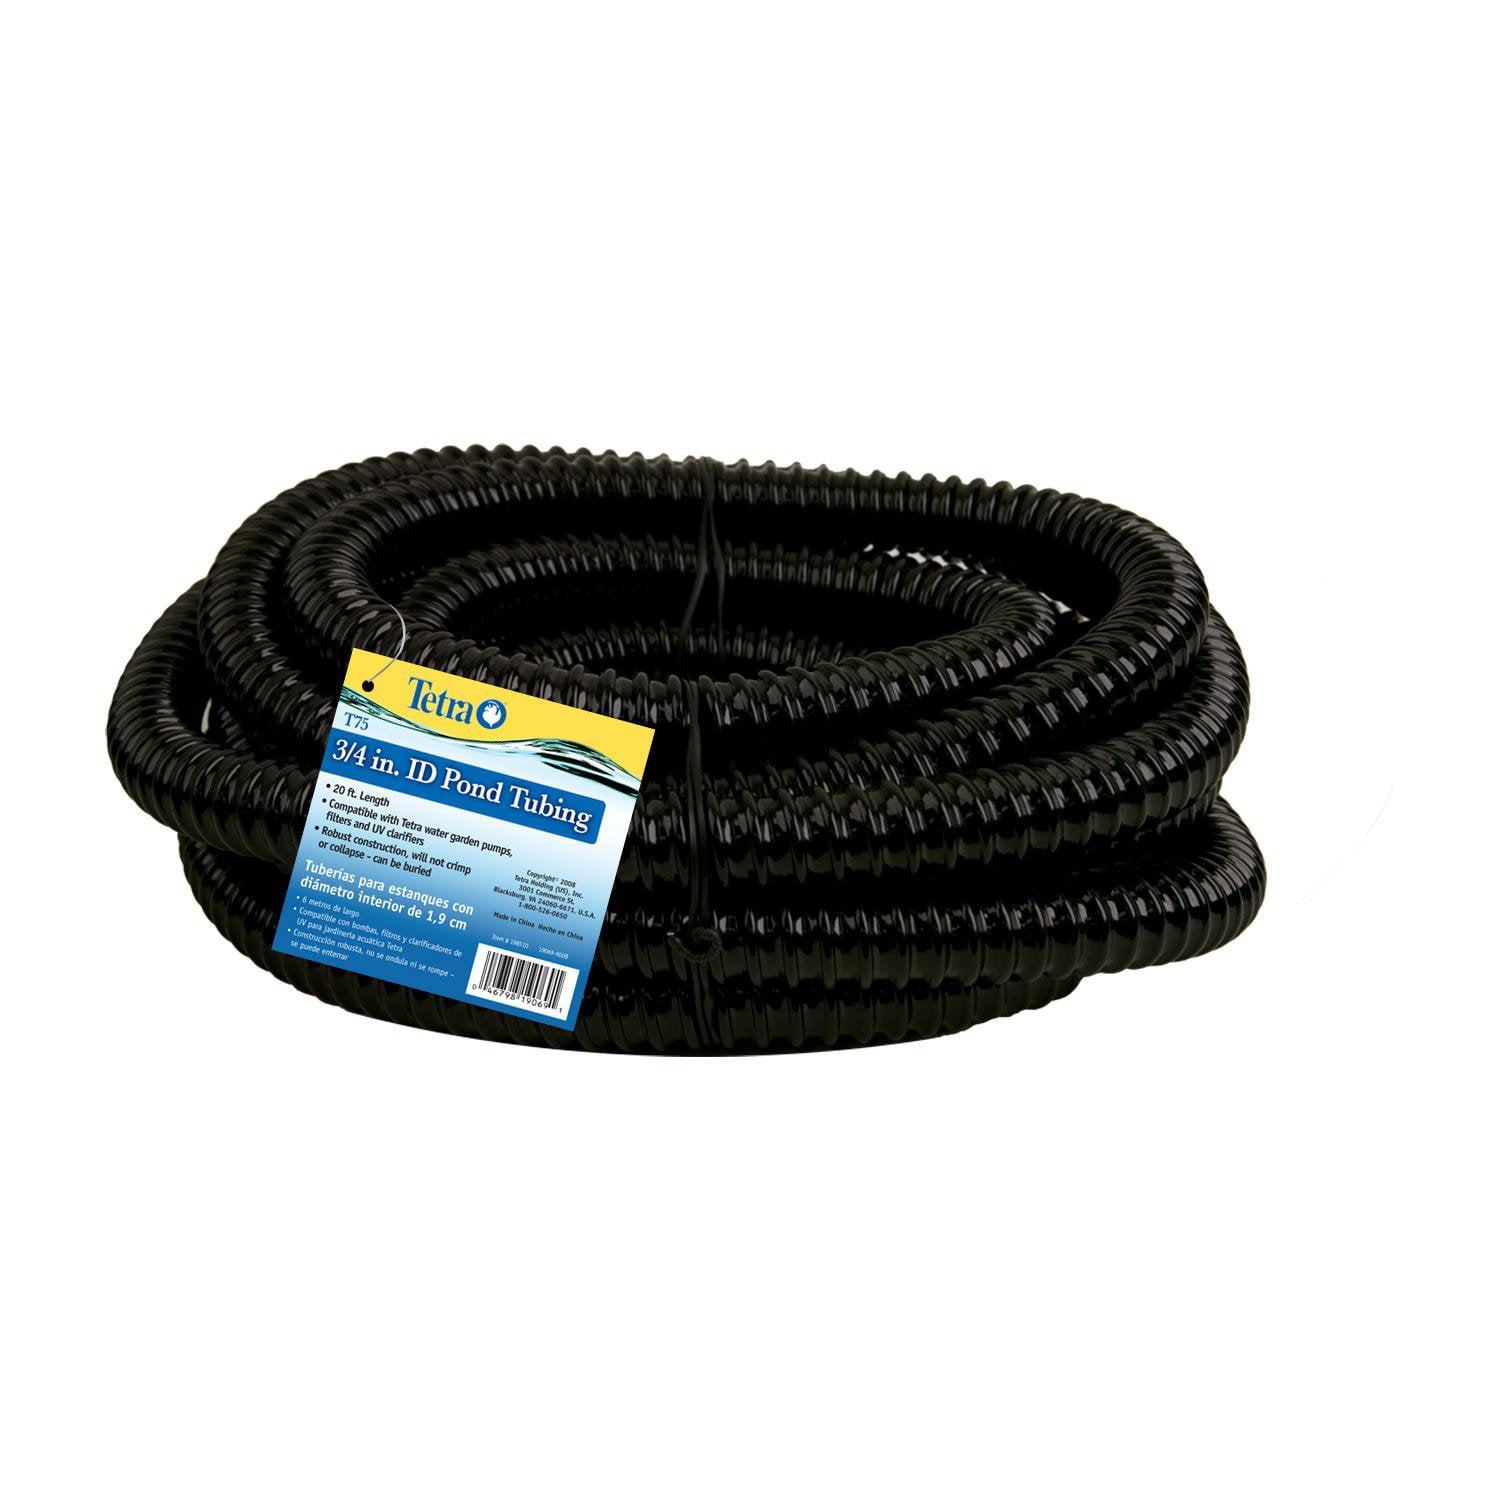 New TetraPond Pond Tubing 1-1/4-Inch by 20-Feet Will Not Crimp Or Collapse 